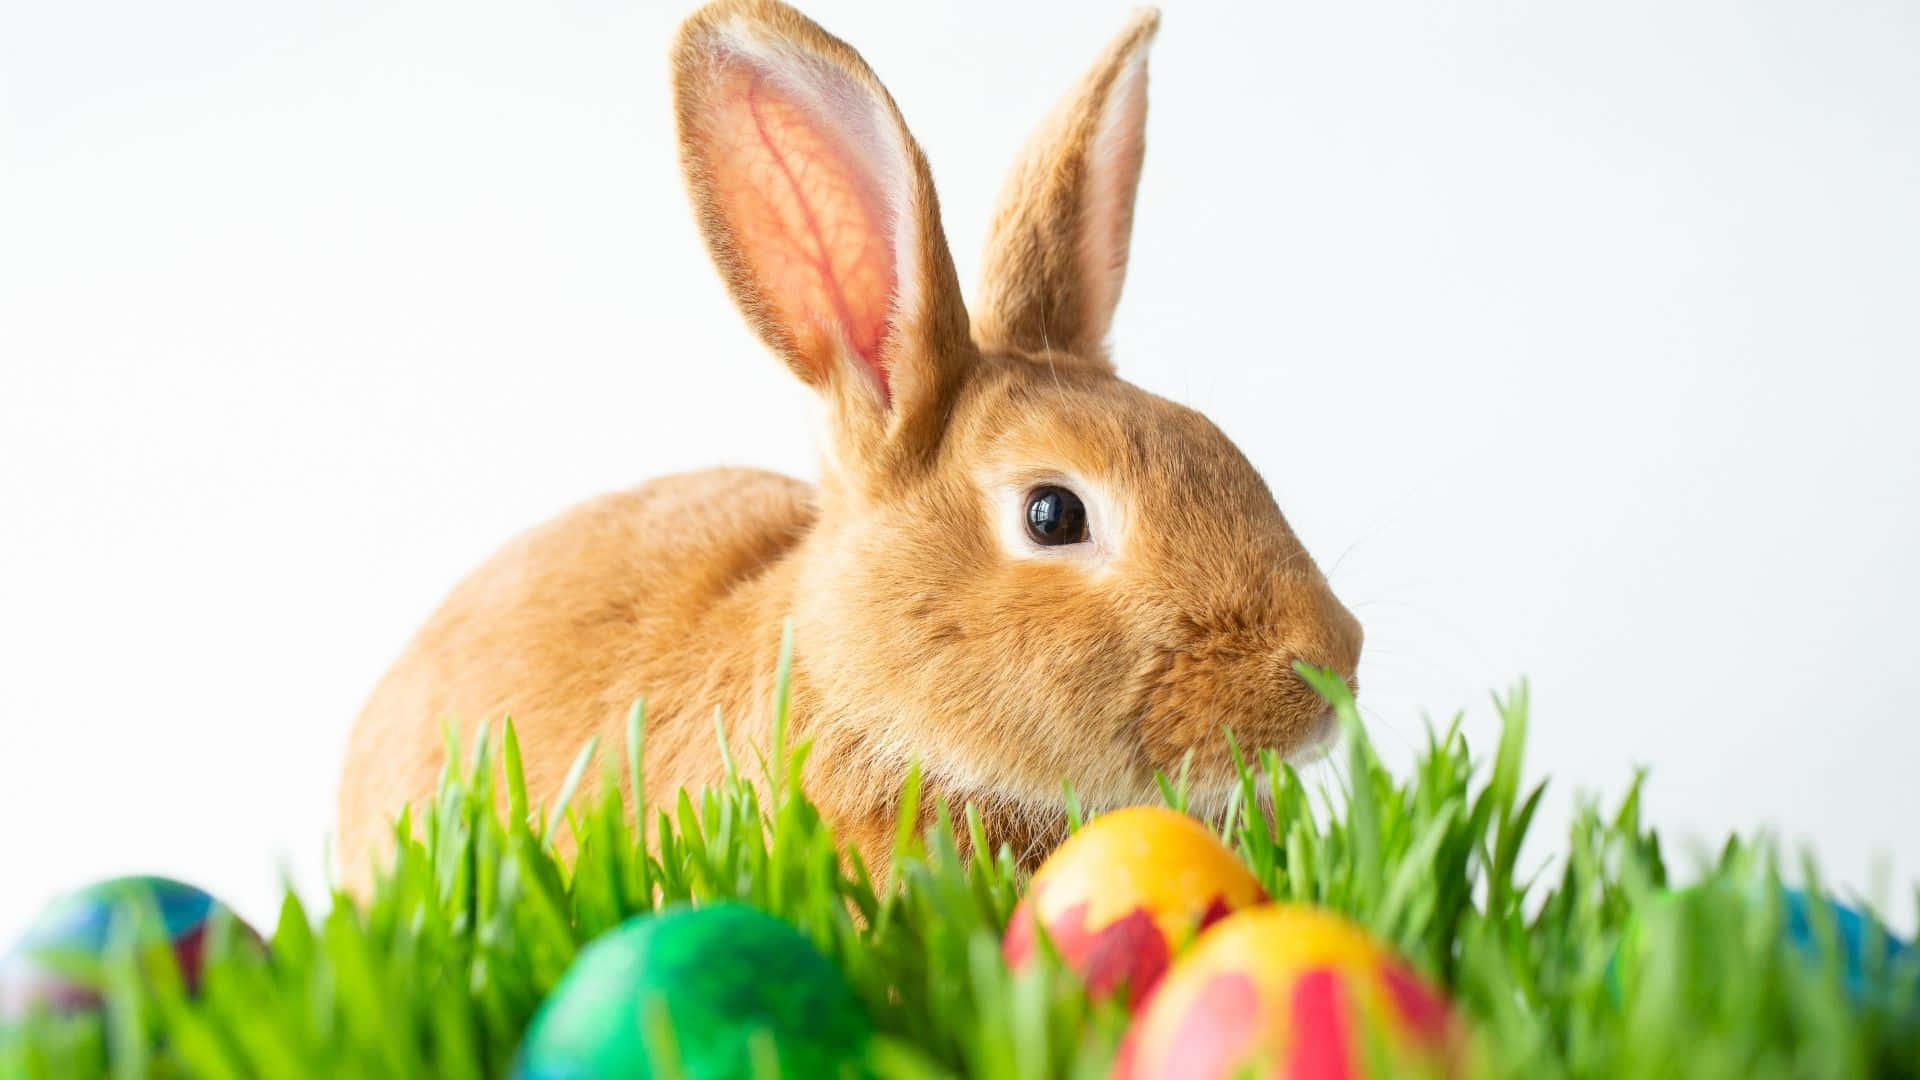 Get Ready For Easter Egg Hunt With The Easter Bunny! Background